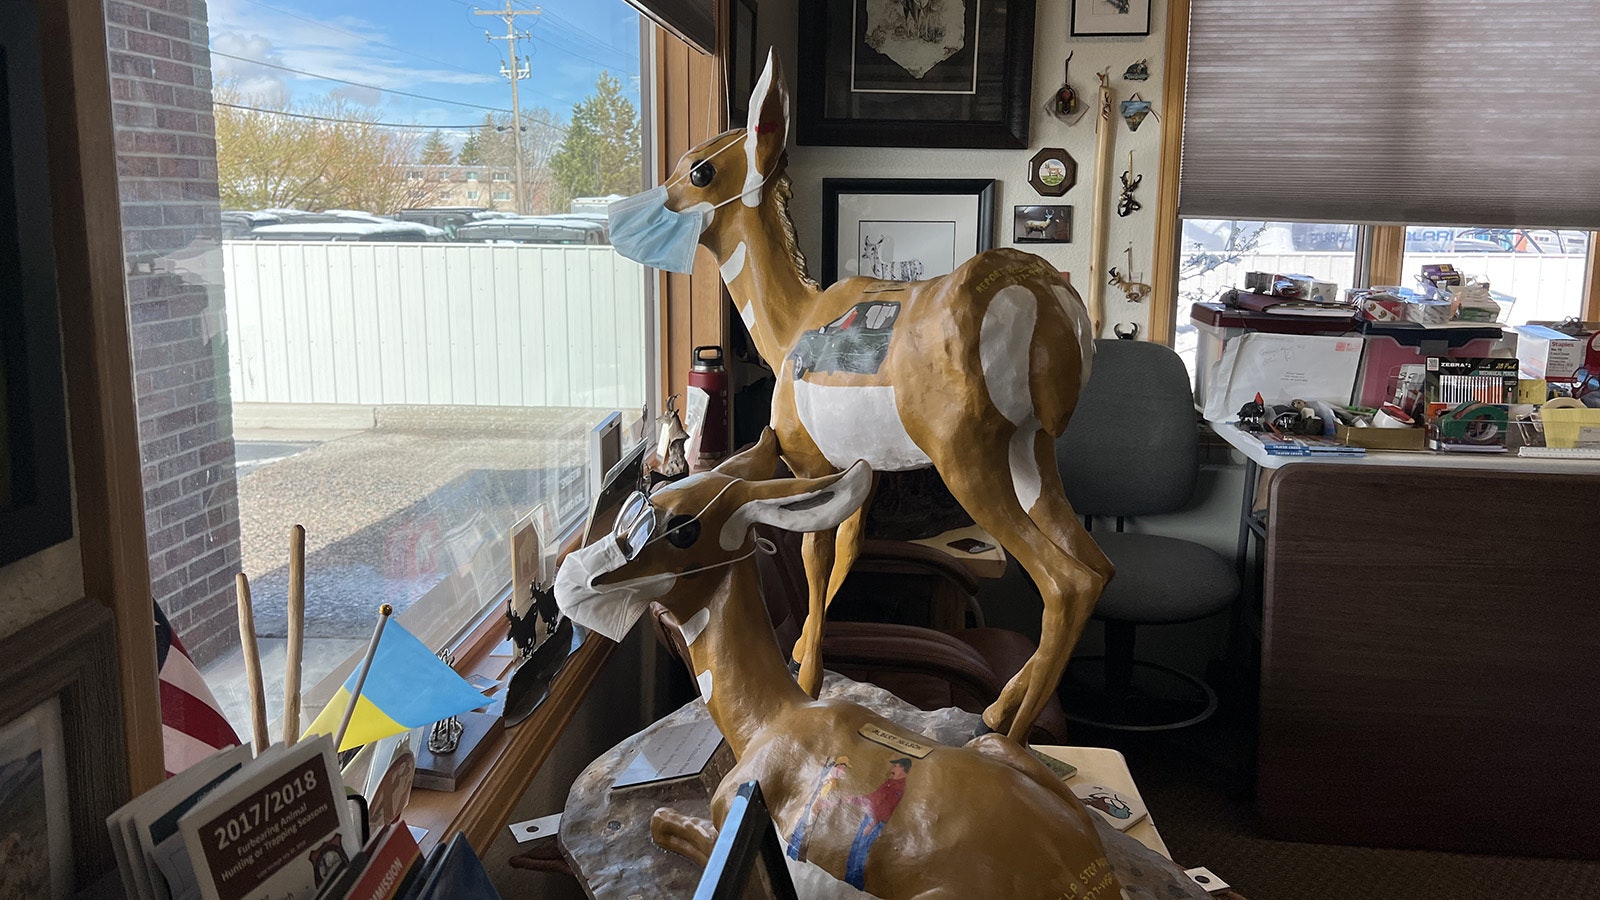 Wildlife biologist Rich Guenzel's office in Laramie has depictions of pronghorn created by artists from Wyoming and across the West.